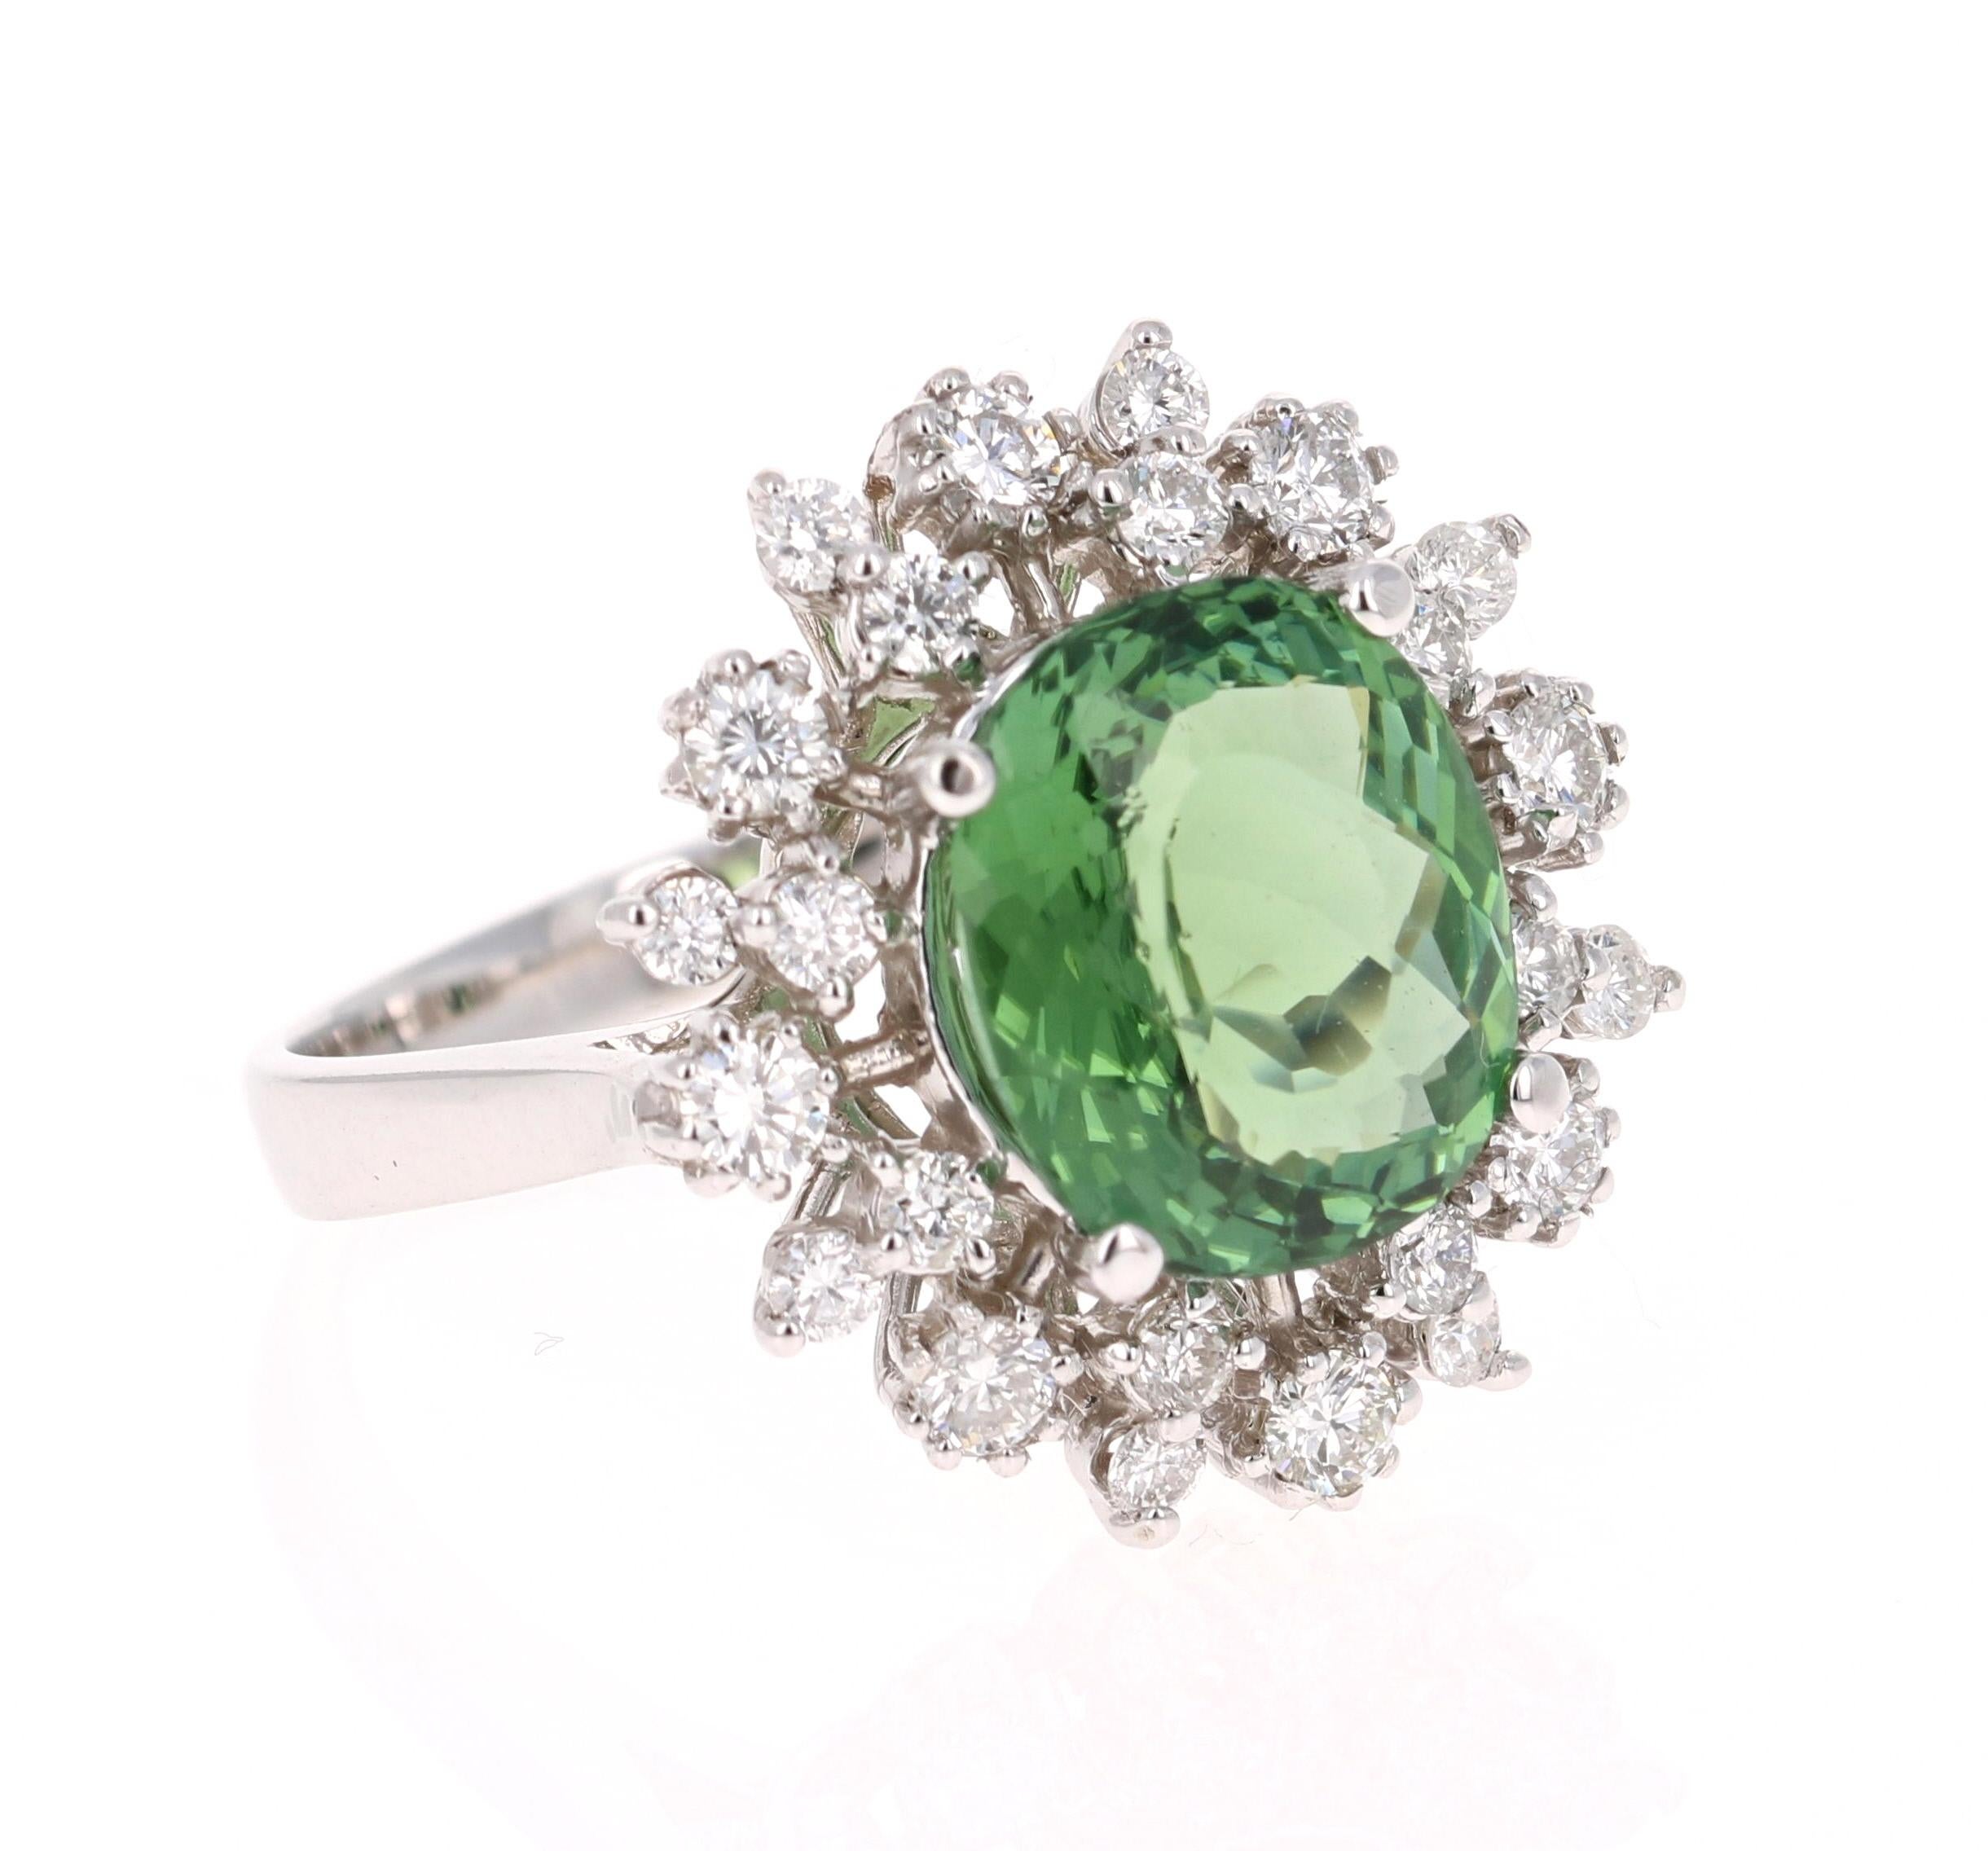 A beauty that is sure to be nothing less than a statement! Very much inspired by the Victorian Era intertwined by a Ballerina Design Ring! 

This ring has a magnificently beautiful Oval Cut Green Tourmaline that weighs 3.90 Carats. Floating around